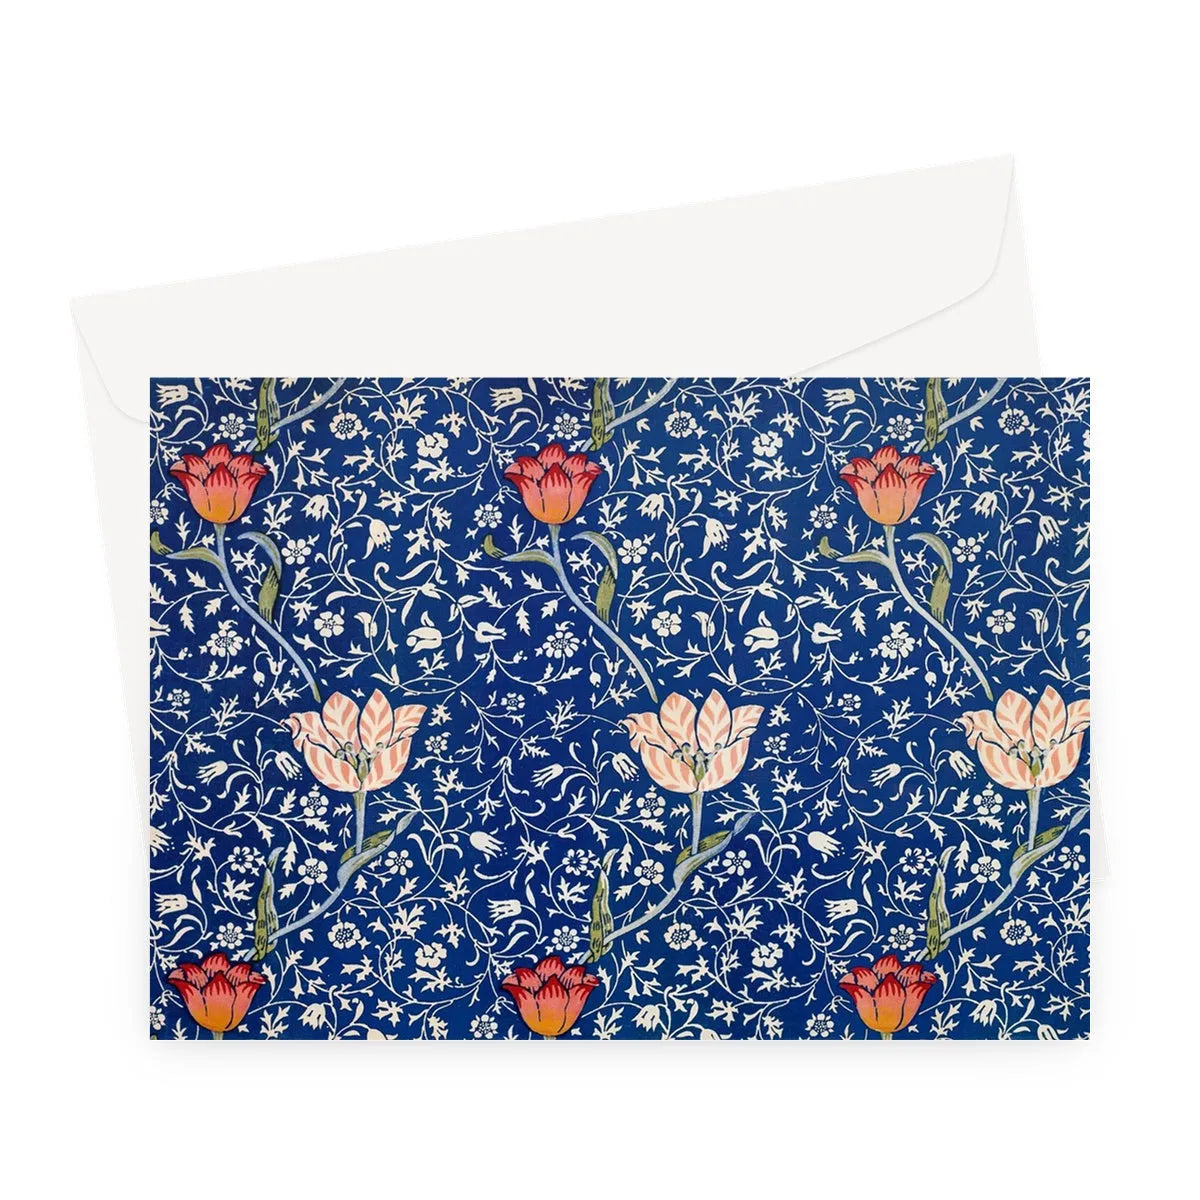 Medway By William Morris Greeting Card - A5 Landscape / 1 Card - Greeting & Note Cards - Aesthetic Art